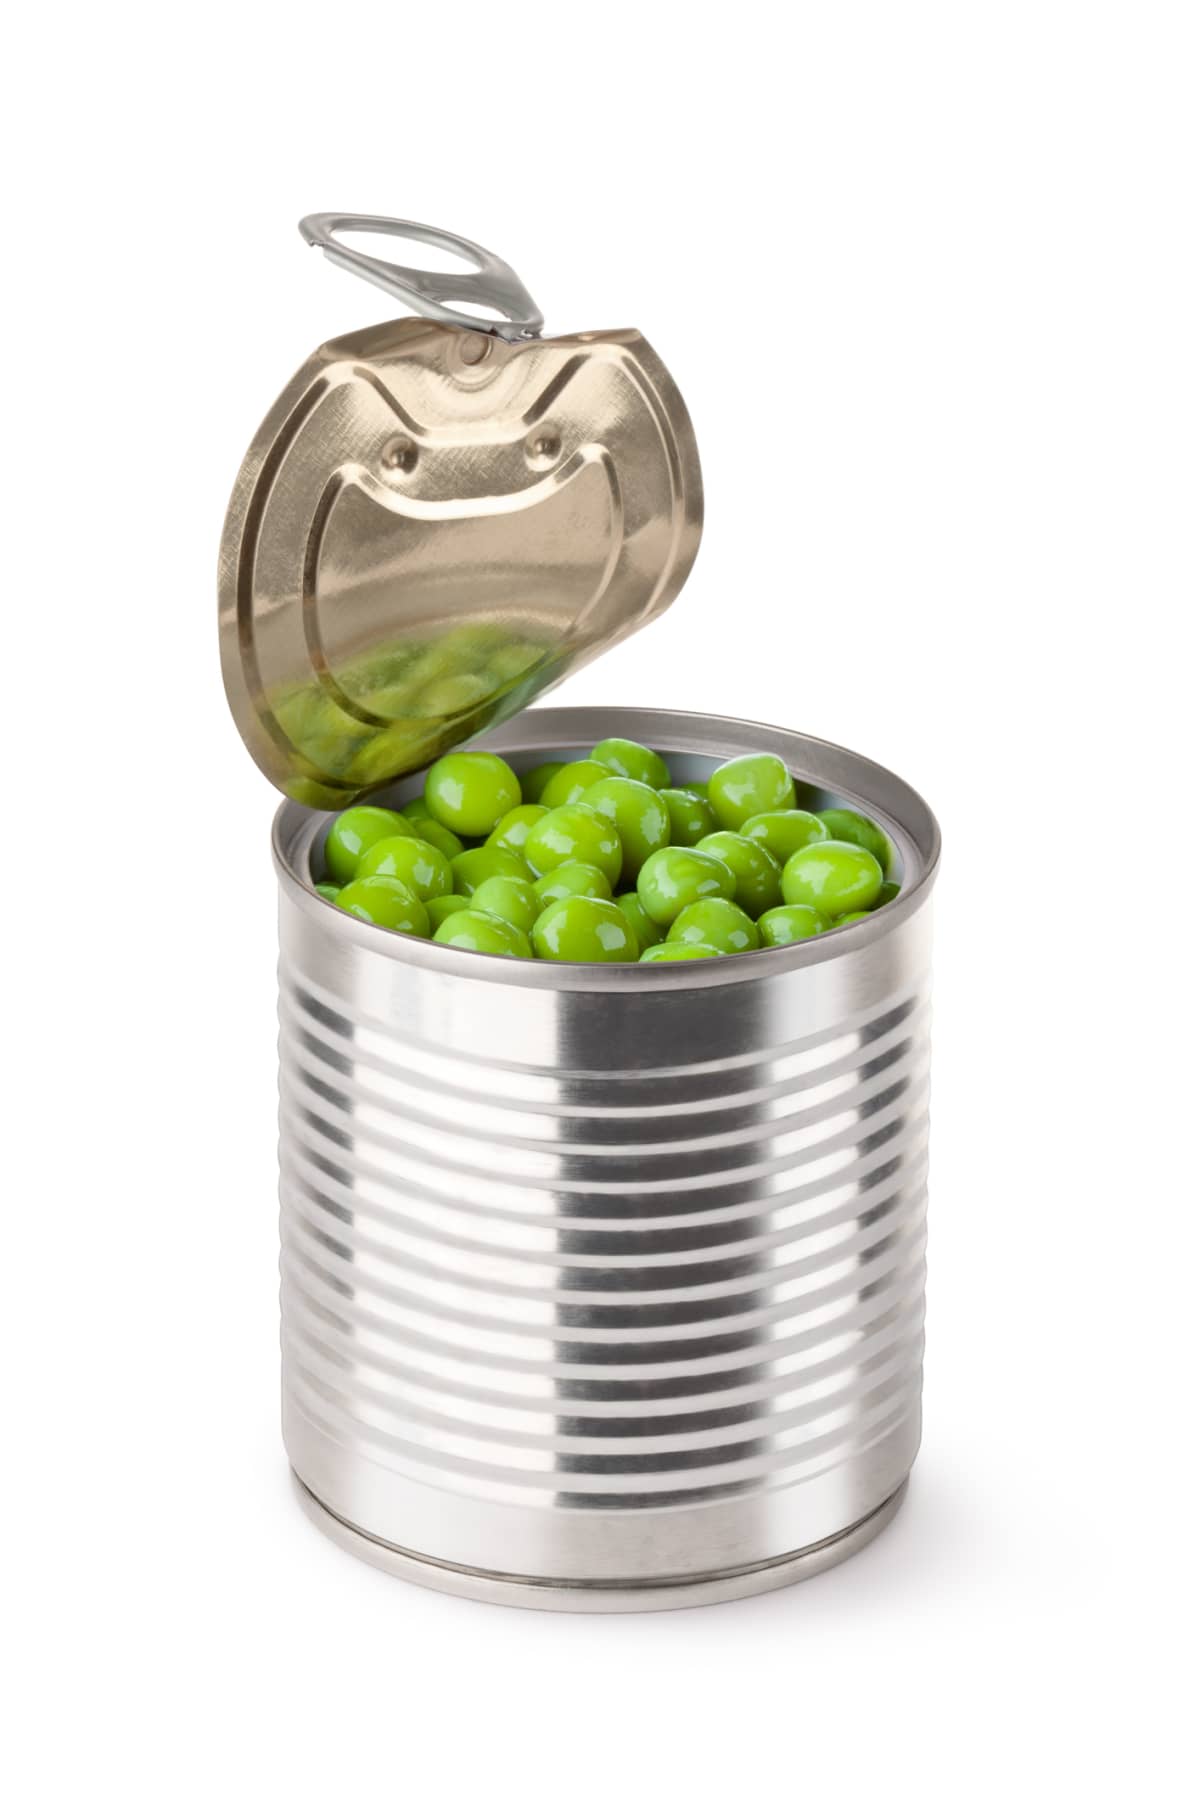 Opened metallic can with green peas on white background